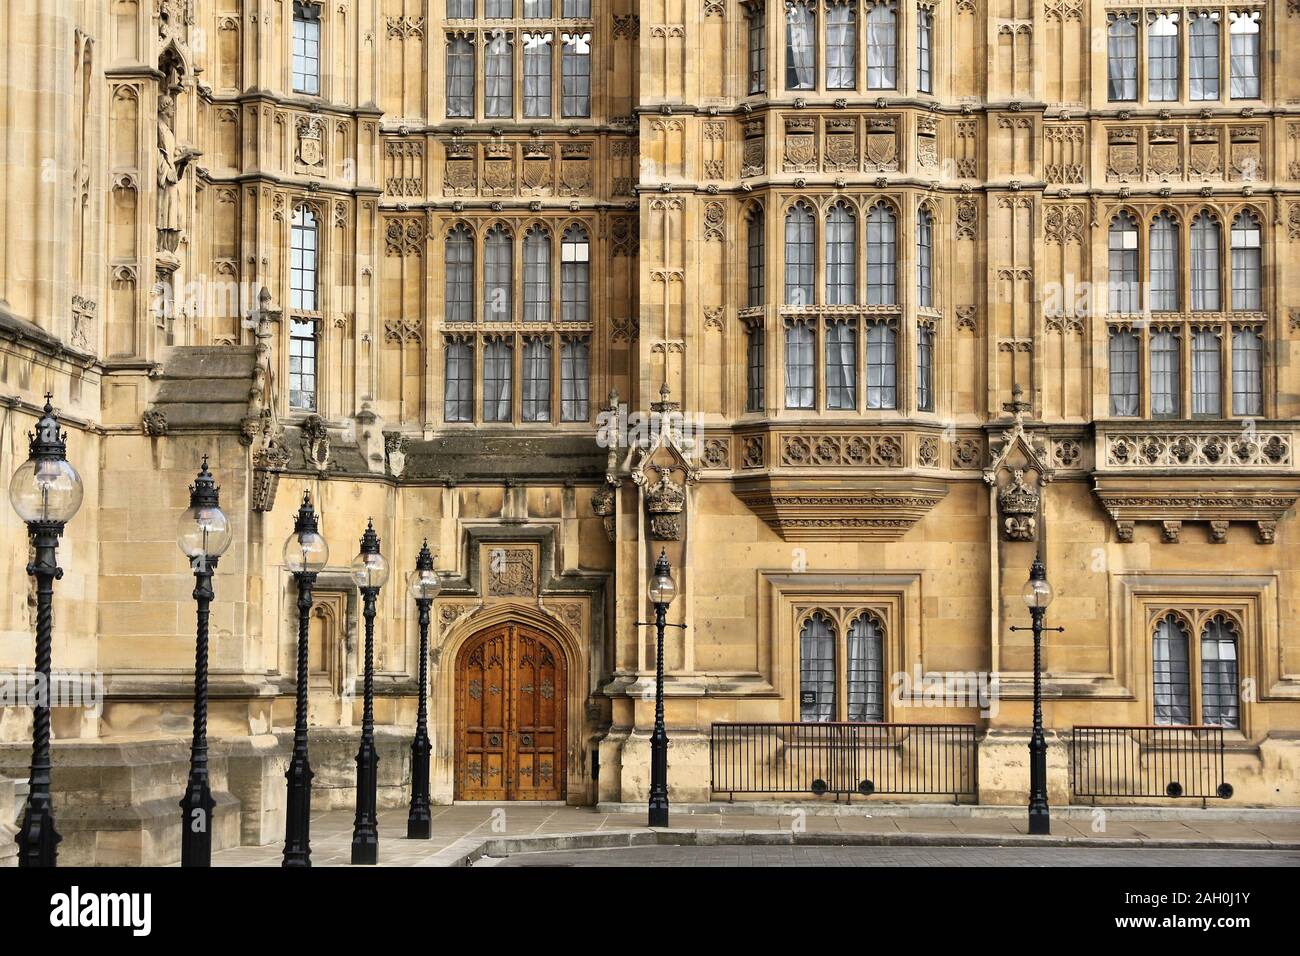 London, England. Palace of Westminster (Houses of Parliament). Stock Photo